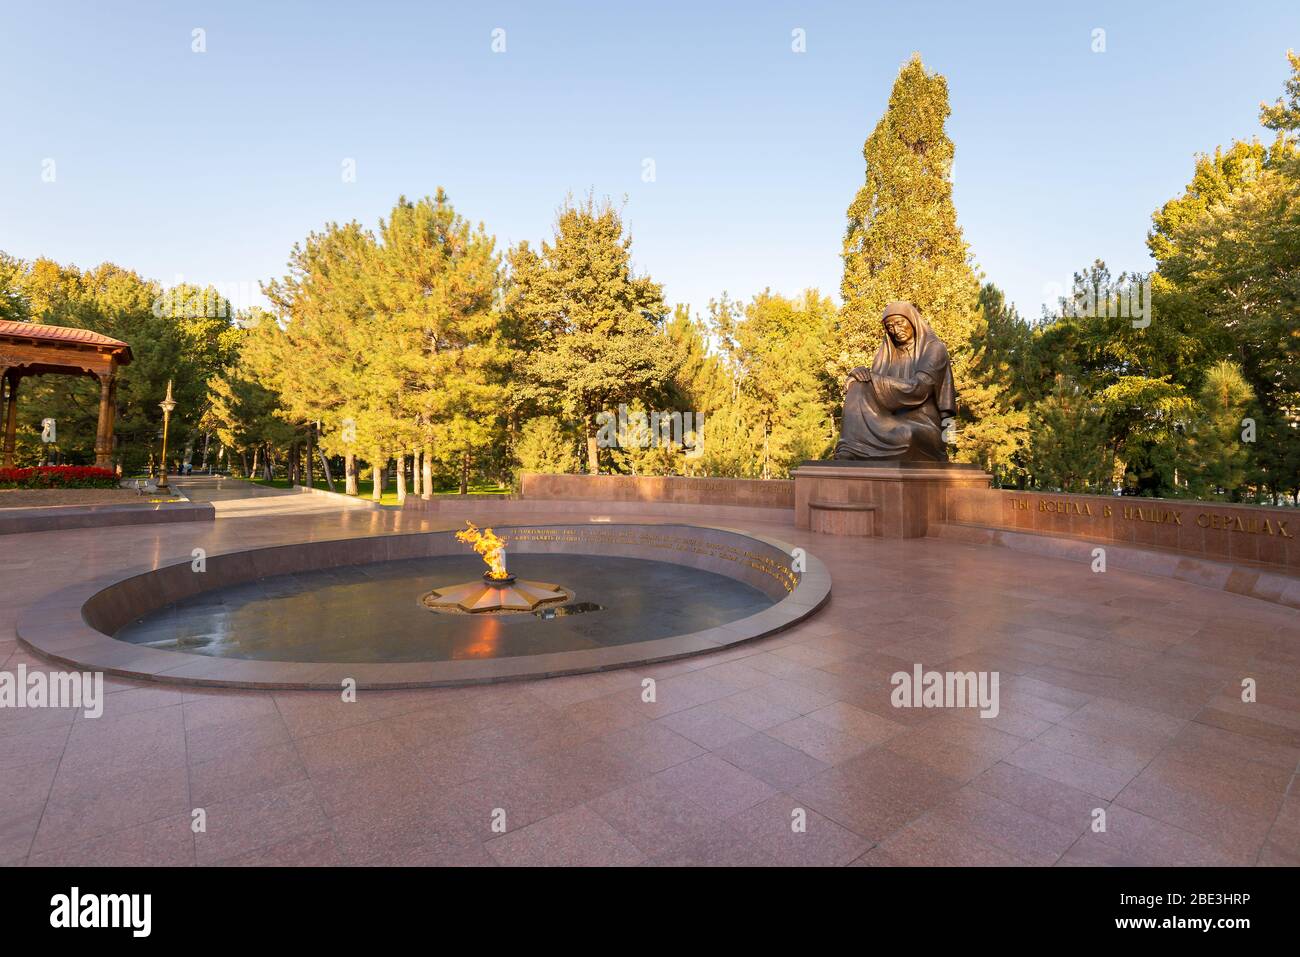 Eternal Flame monument located in Mustaqillik Maydoni Square in Tashkent, Uzbekistan. Tomb of the Unknown Soldier in Square of memory and Honor. Stock Photo